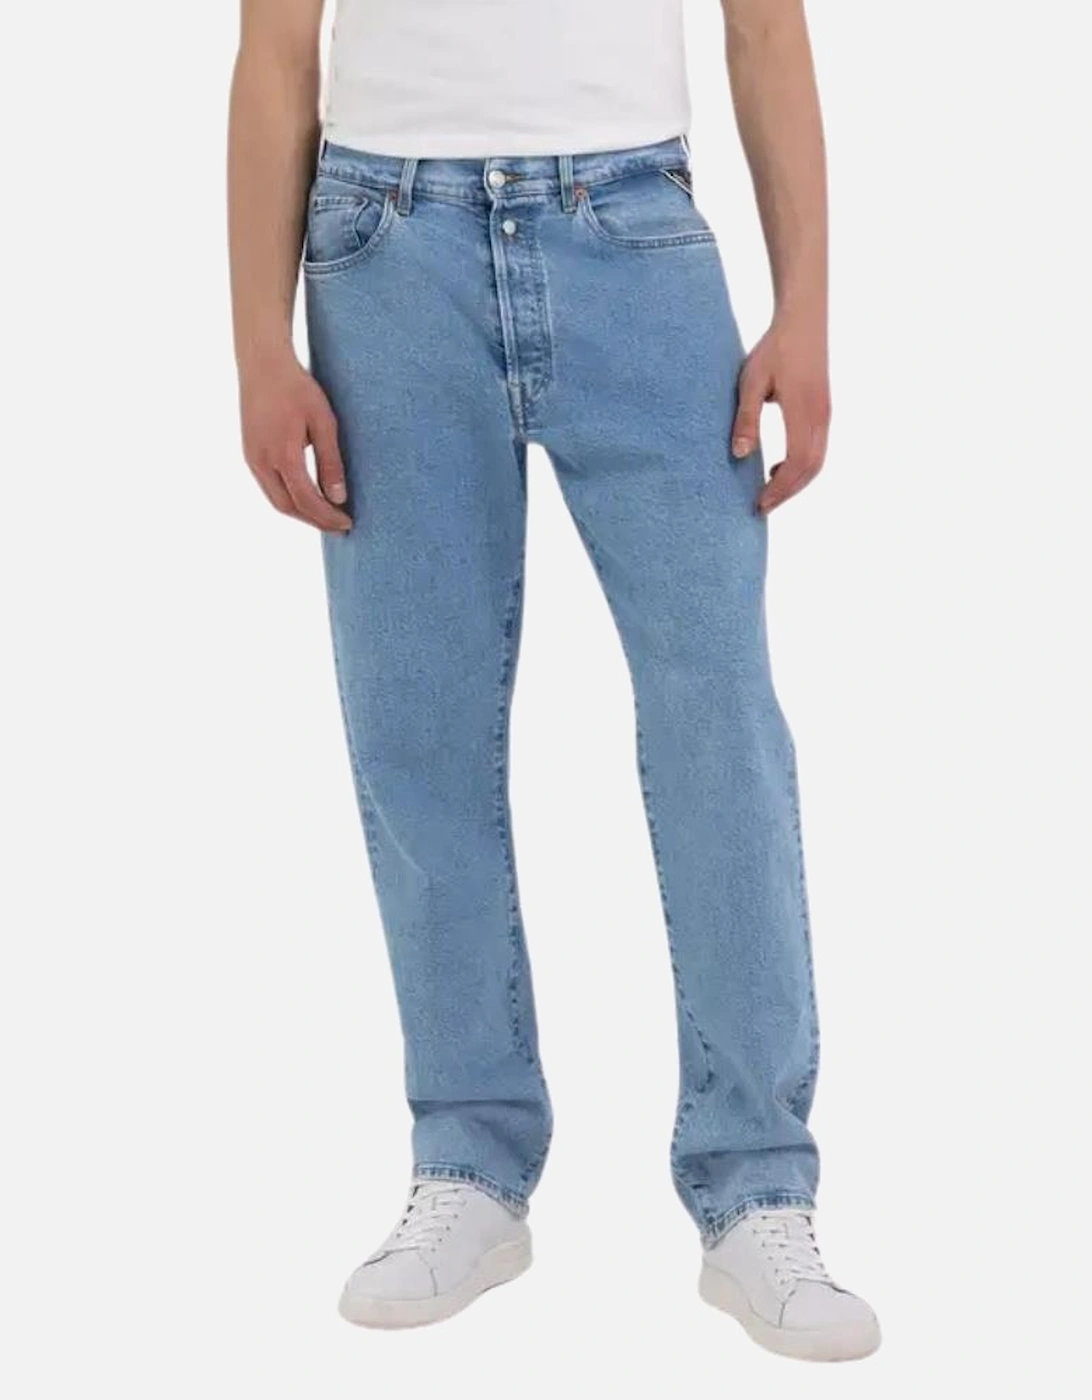 9Zero1 Straight Fit Jeans, 8 of 7